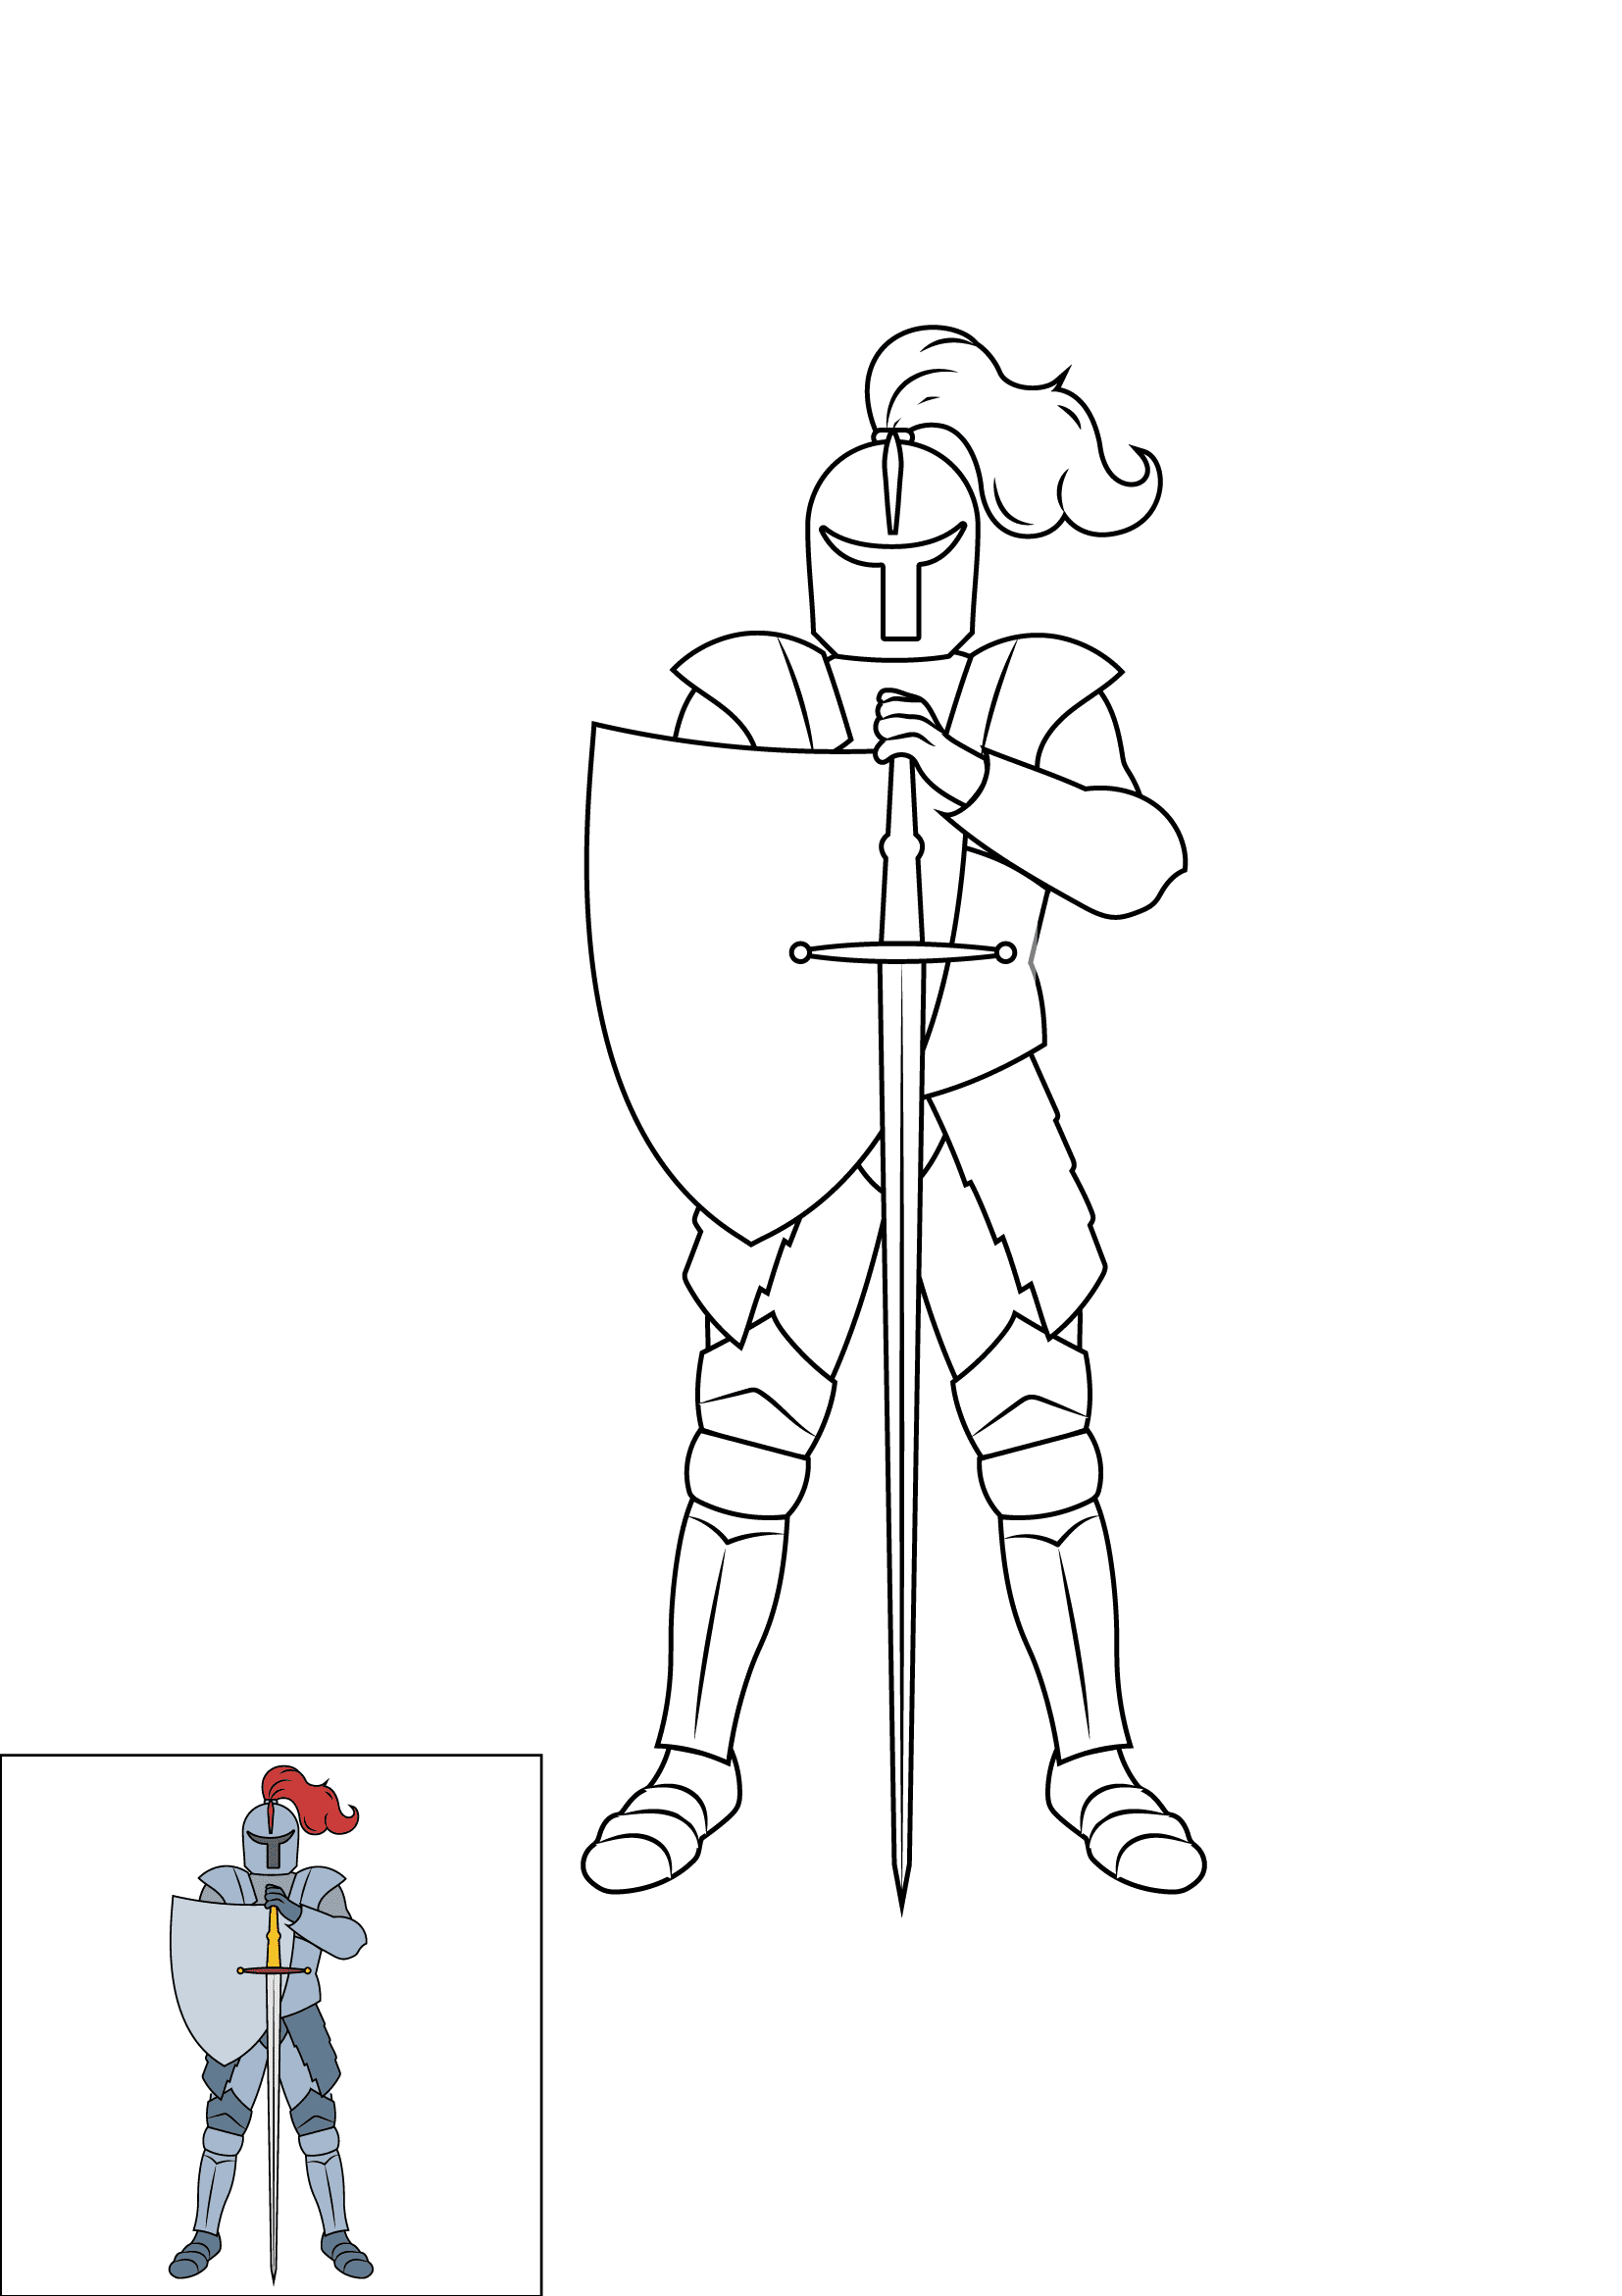 How to Draw A Knight Step by Step Printable Color